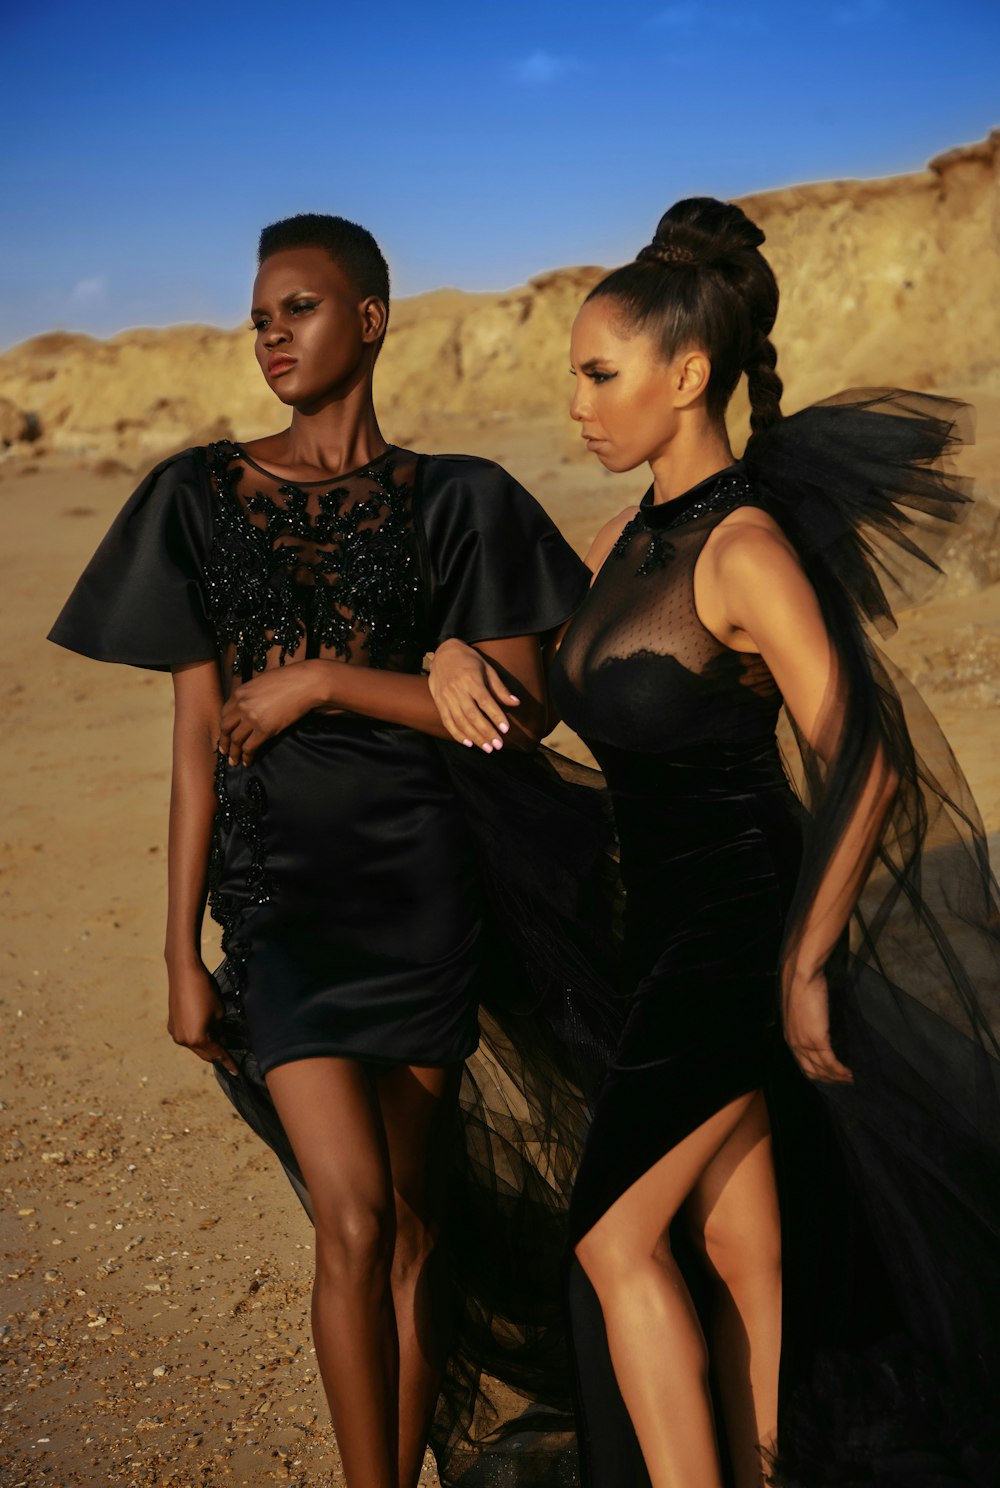 2 women in black dress standing on brown sand during daytime